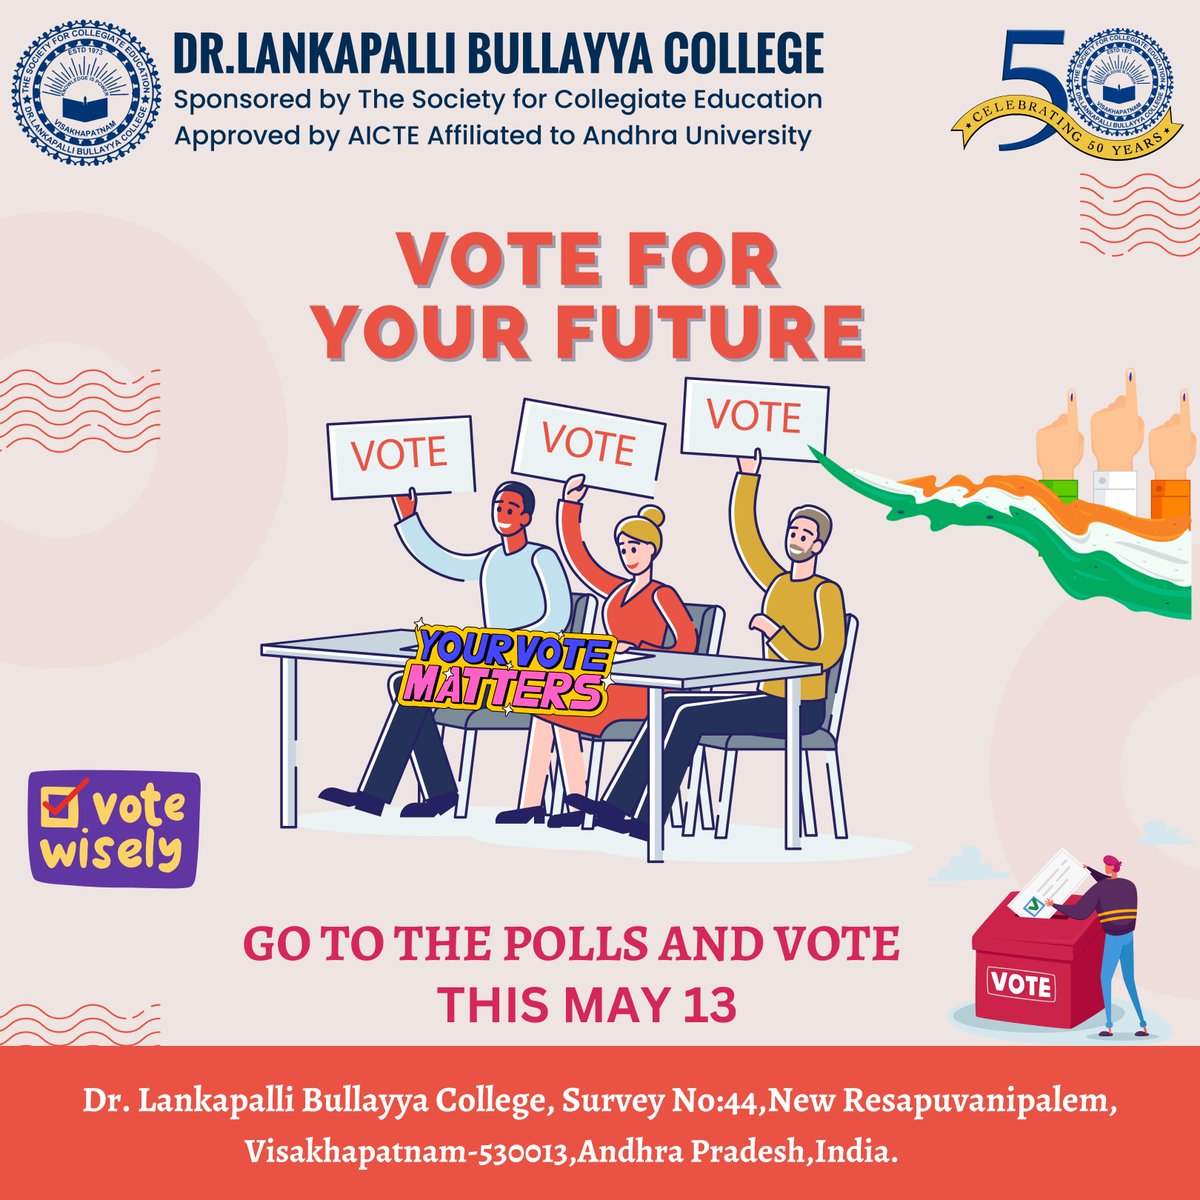 Vote for your future this May 13. #YourVoteMatters

#Vote #DrLBCollege #India #AndhraPradesh #Vizag #Visakhapatnam